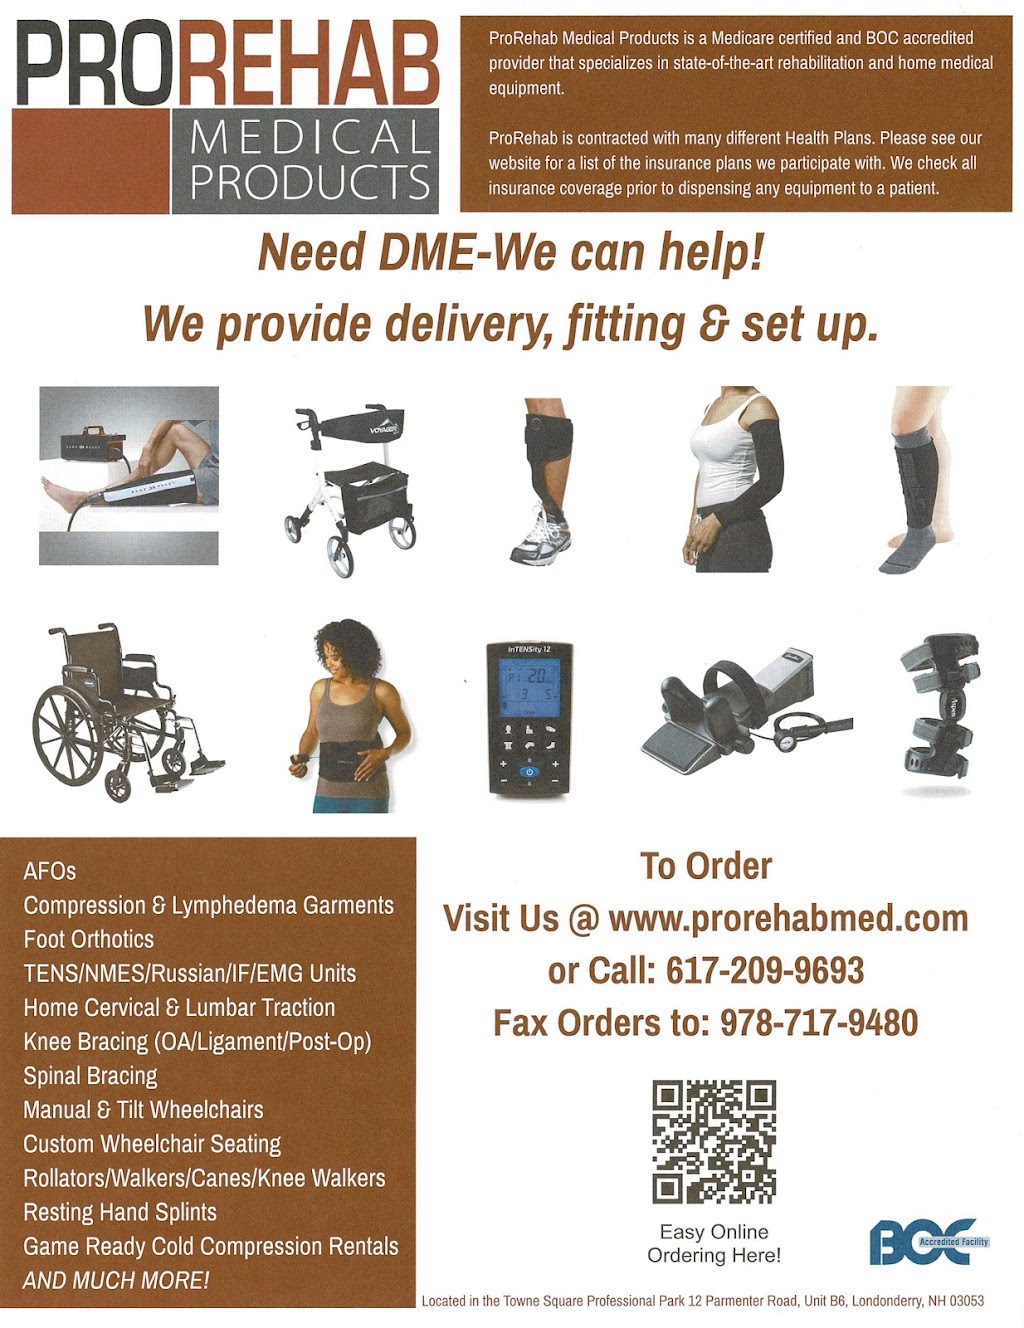 ProRehab Medical Products LLC | Towne Square Professional Park, 12 Parmenter Rd UNIT B6, Londonderry, NH 03053, USA | Phone: (617) 209-9693